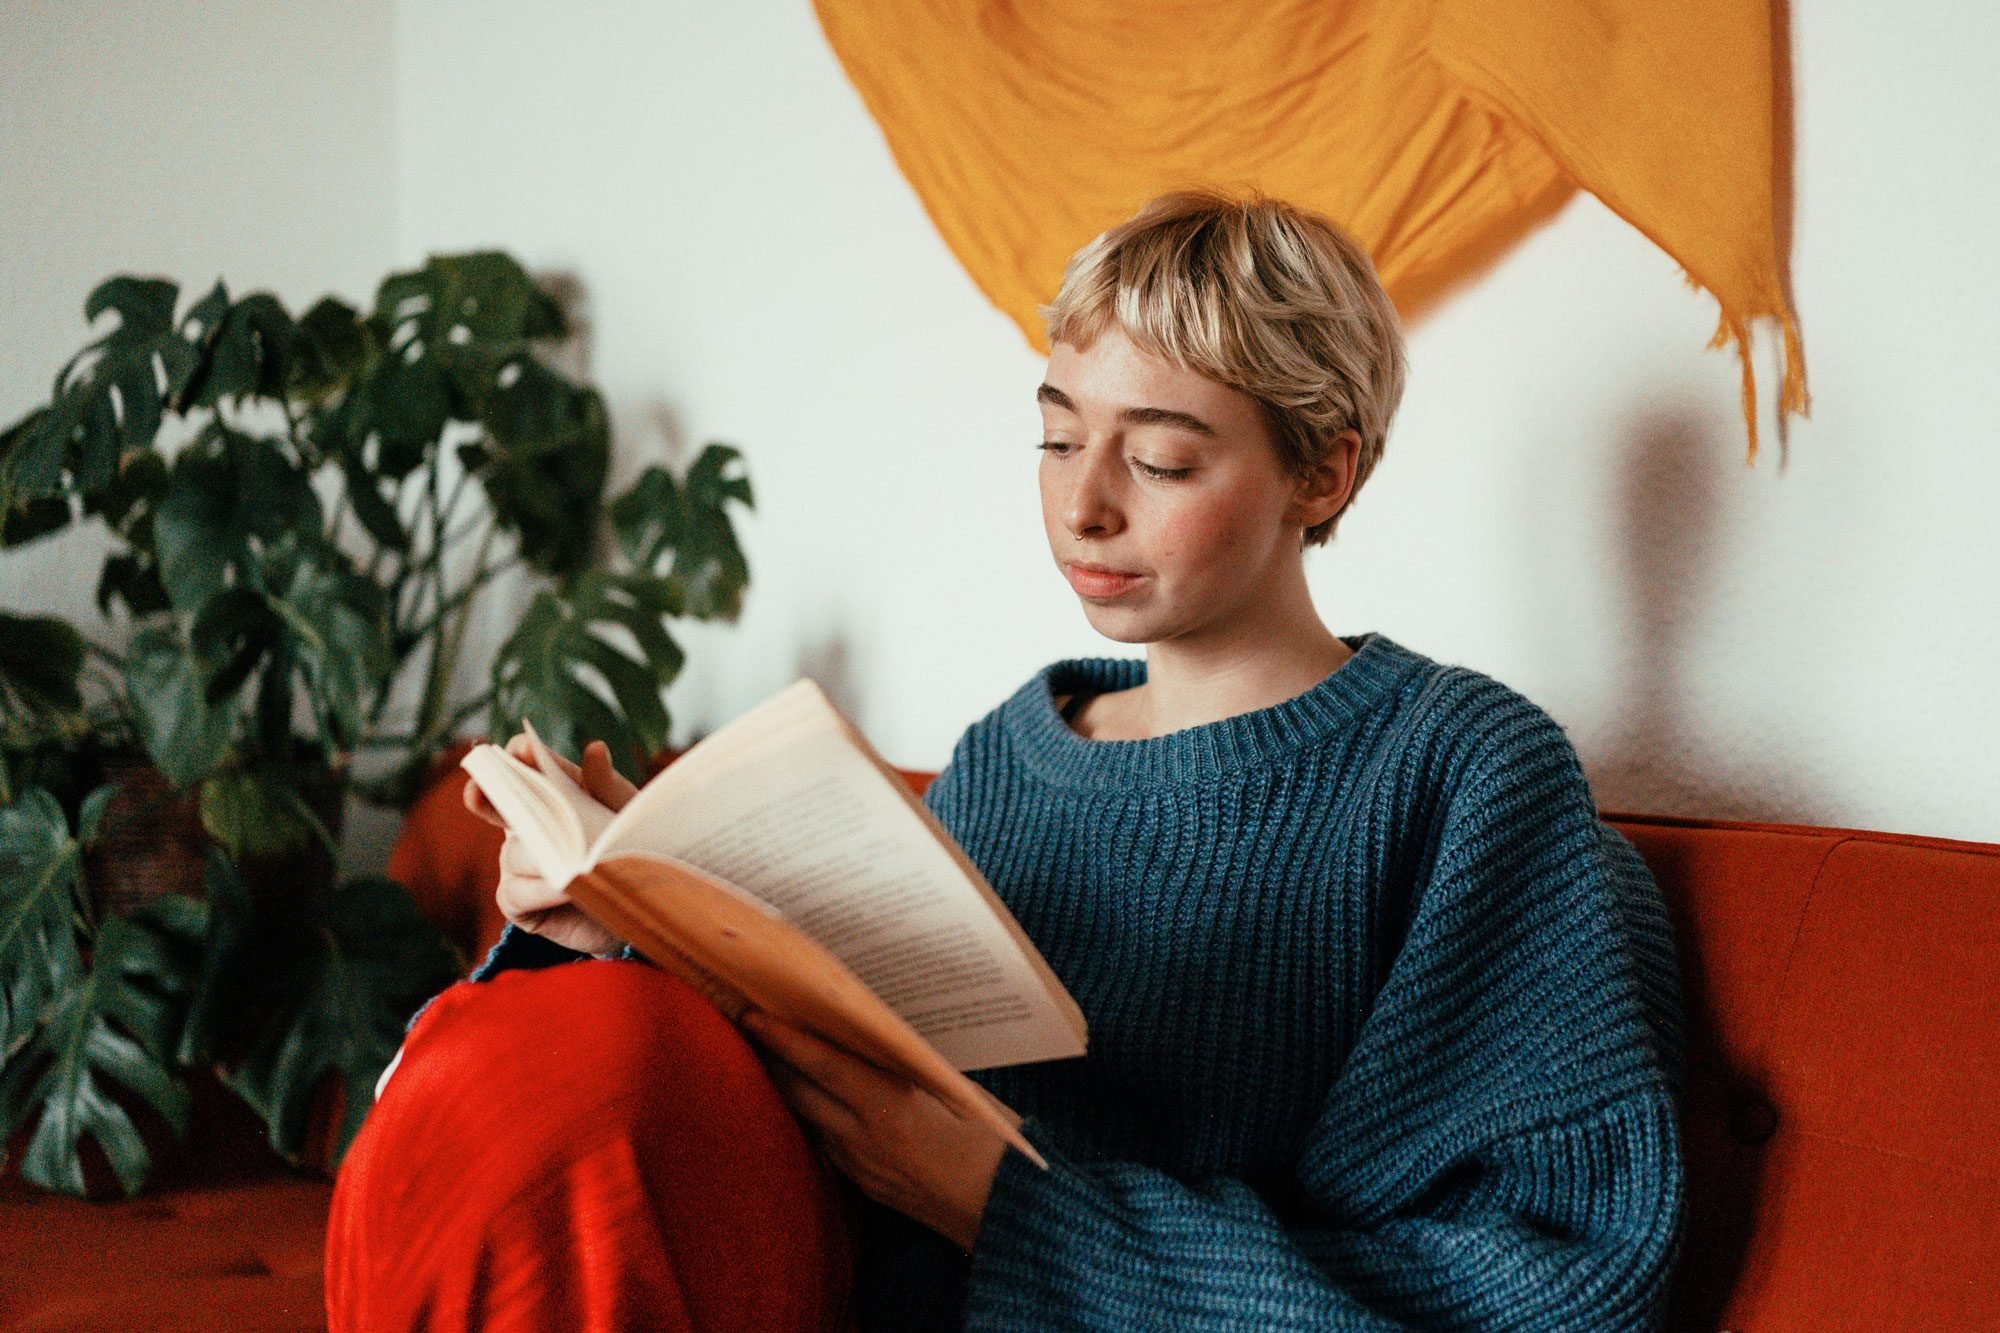 Young Woman Reading A Book On A Couch